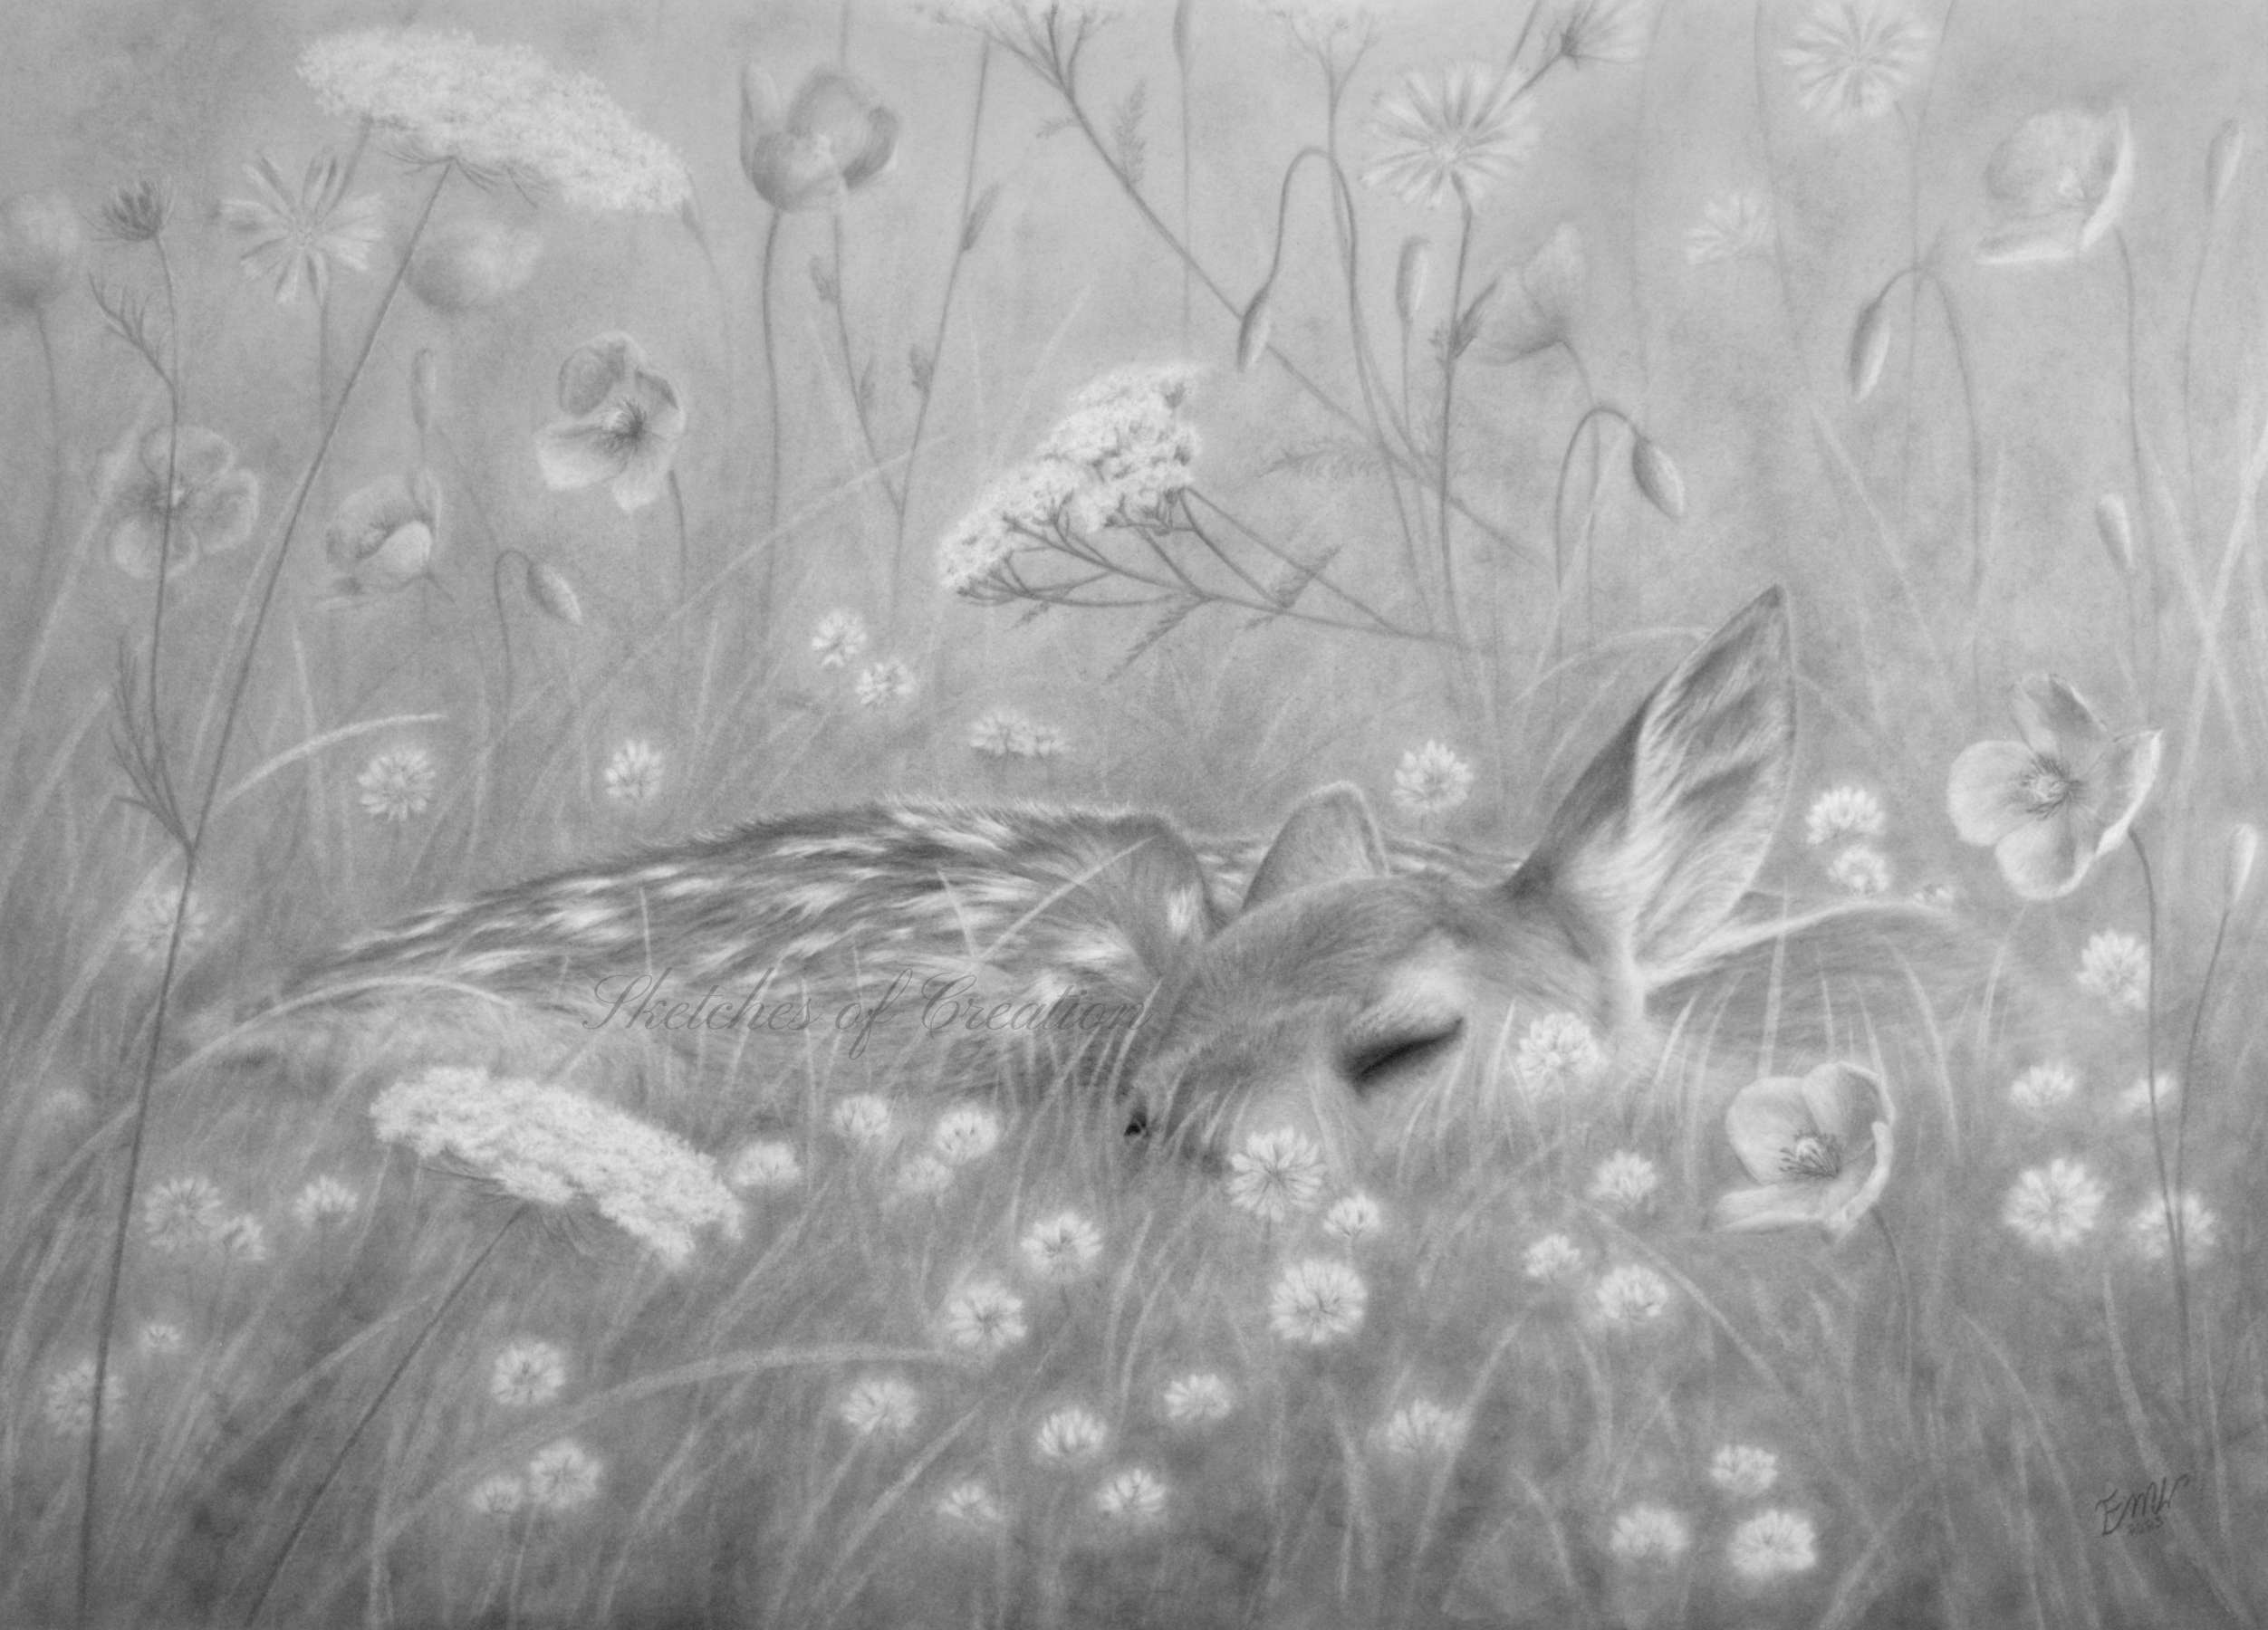 A drawing of a sleeping fawn with flowers